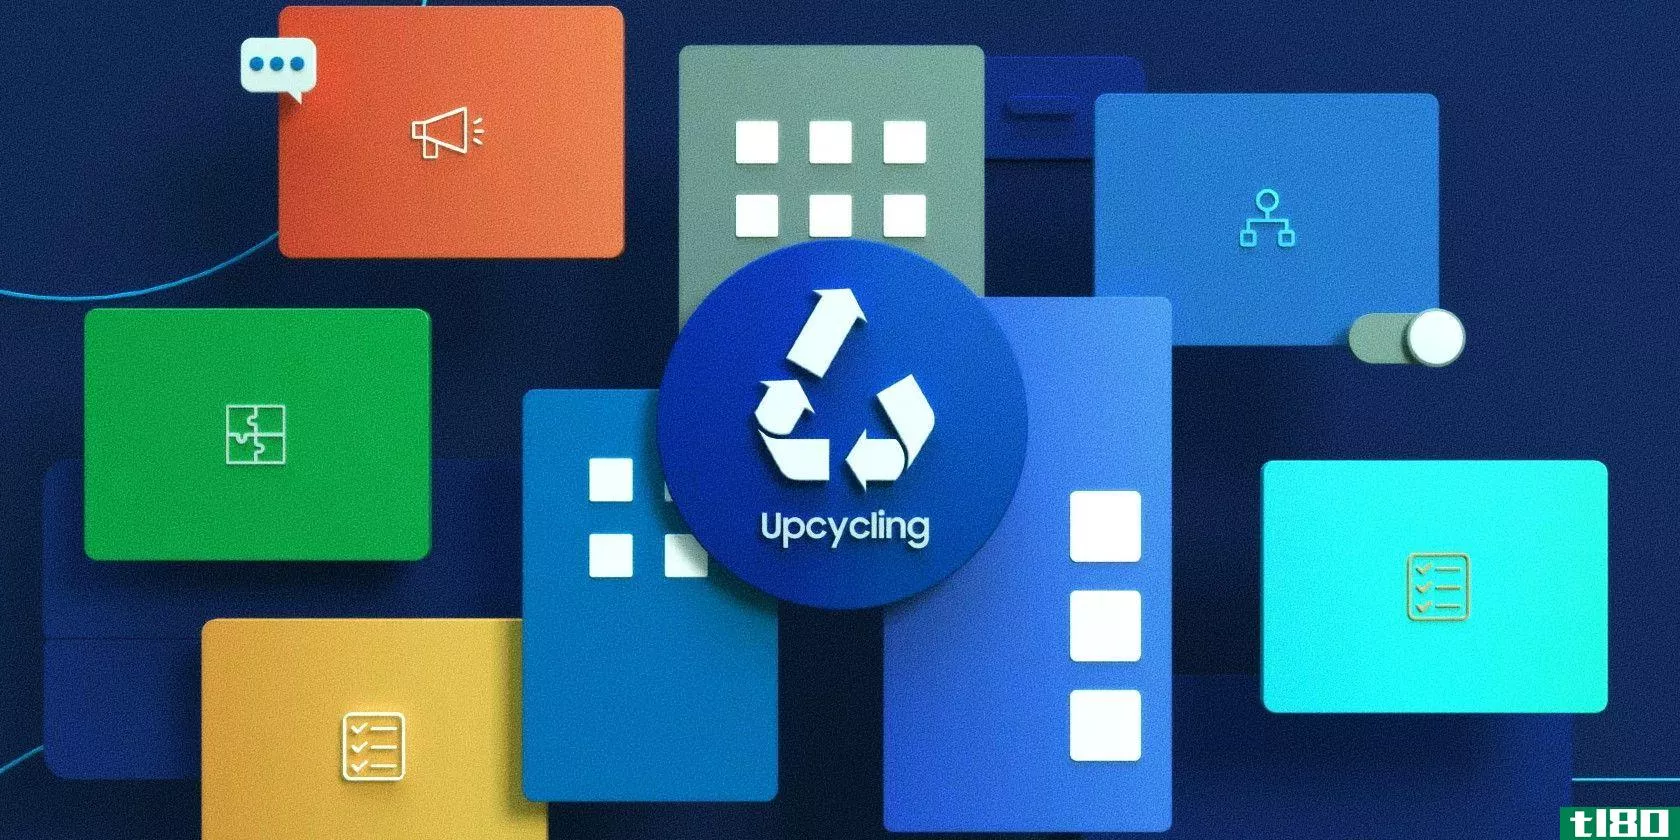 samsung upcycling at home feature